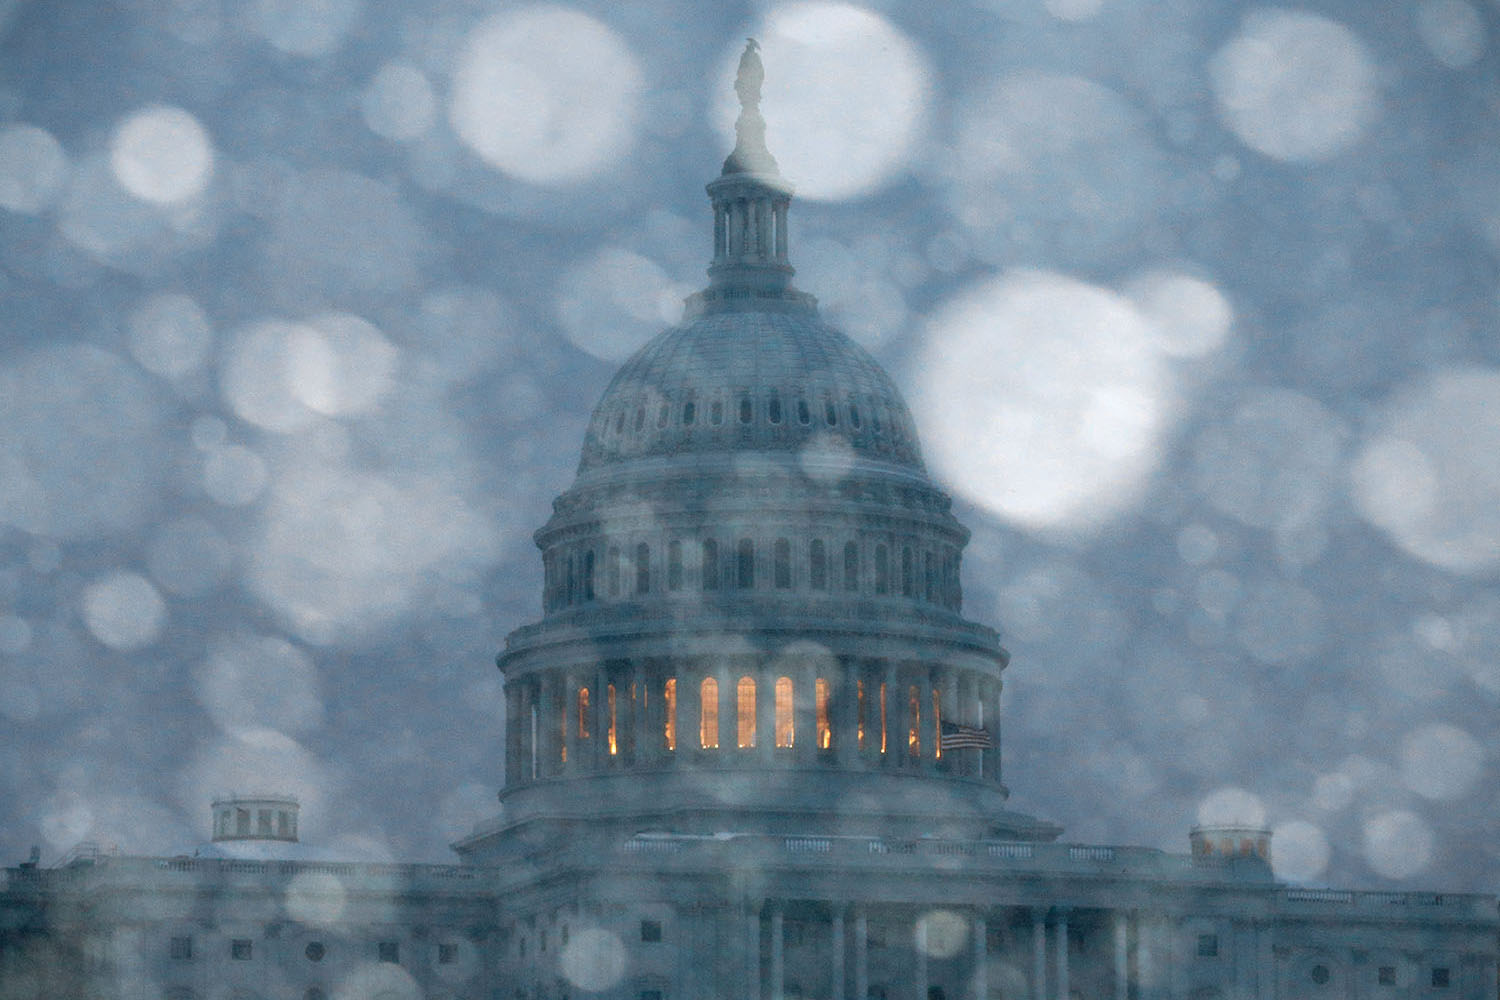 Mar. 3, 2014. Snow falls in front of the U.S. Capitol in Washington, DC. The Federal Government was closed due to major snow storm that was expected to dump up to a foot of snow in the Washington area.